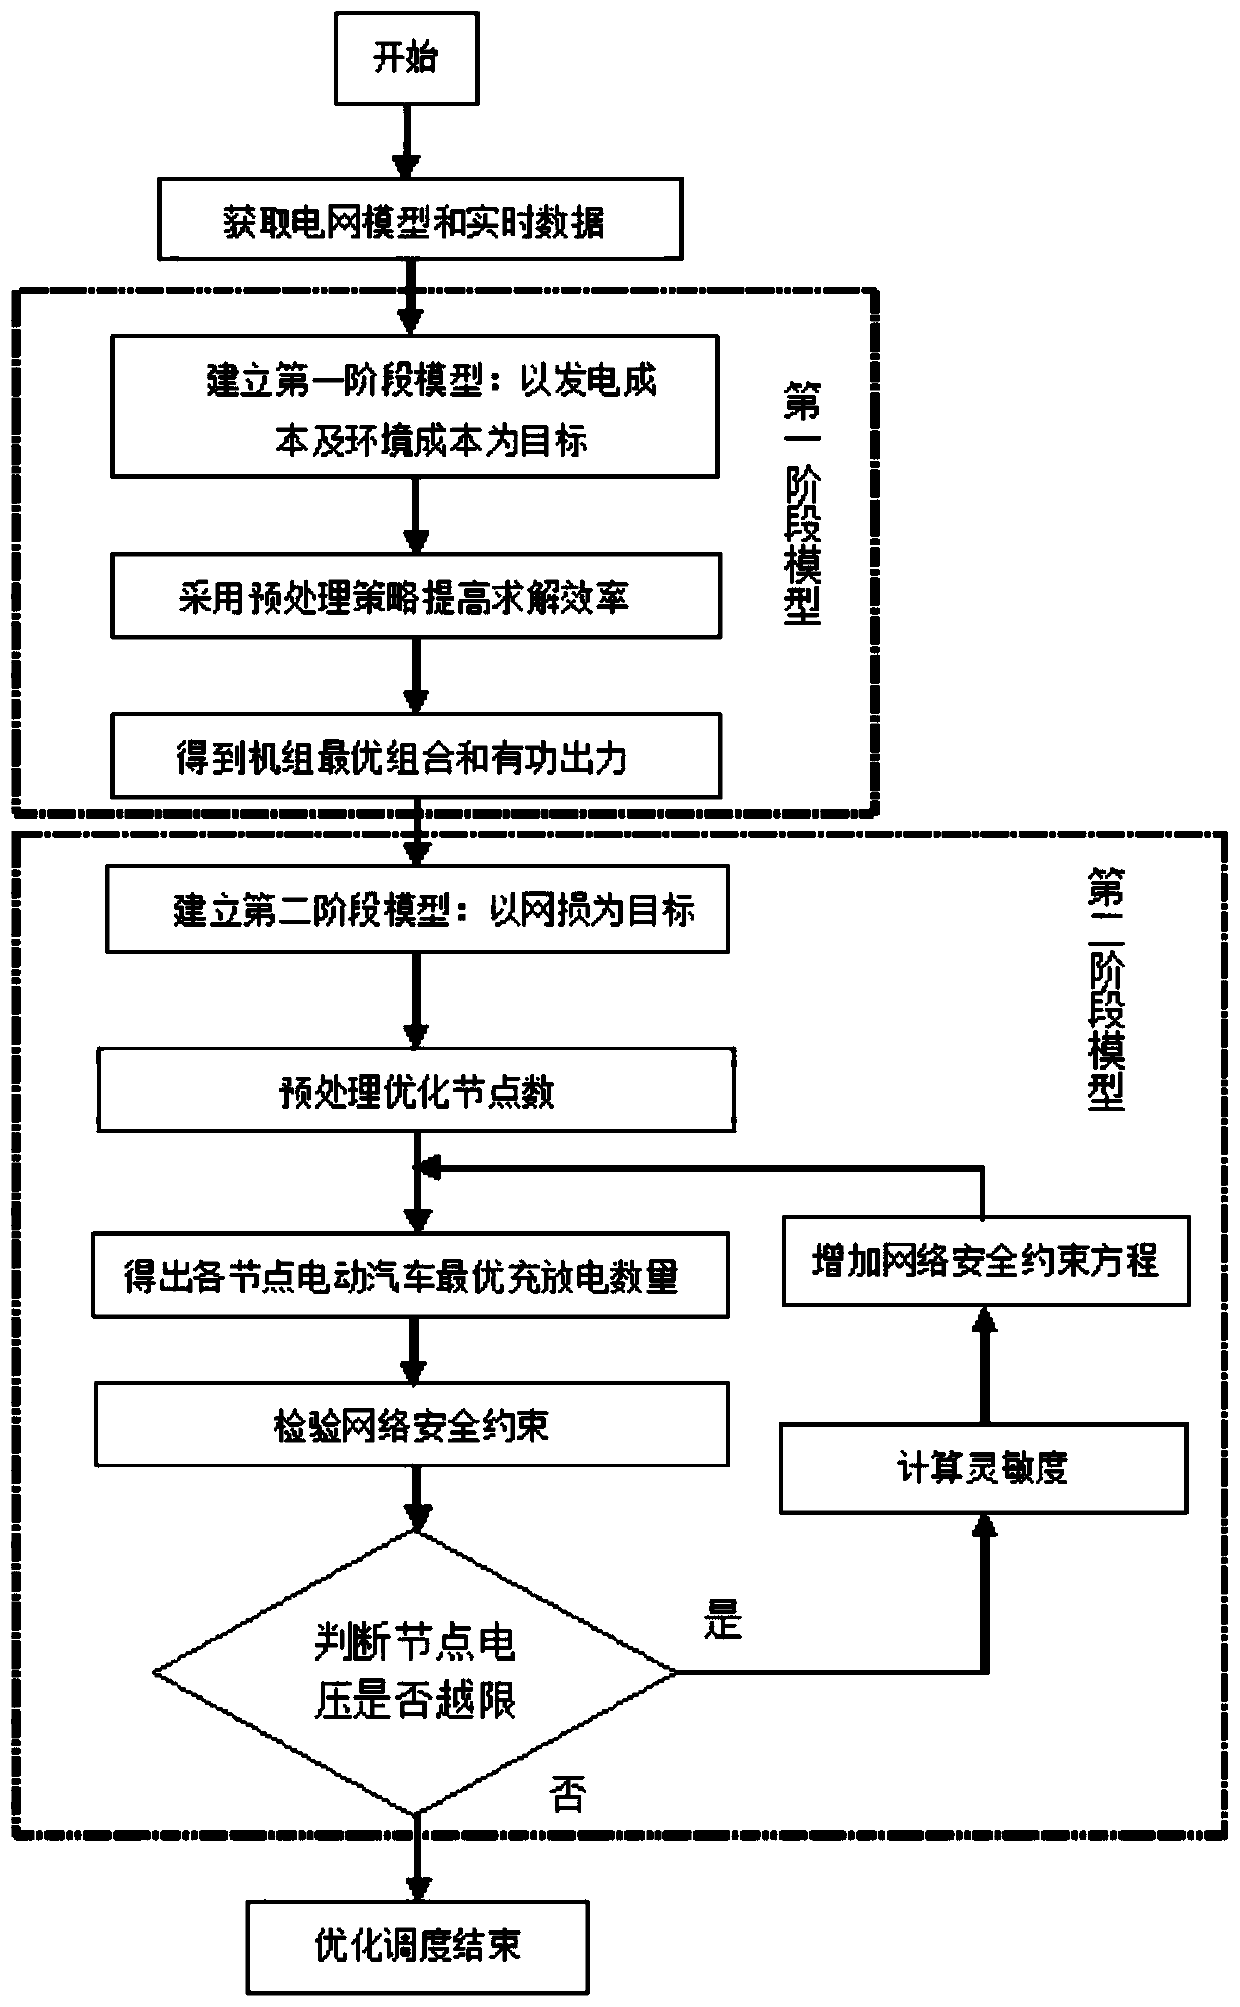 Electric vehicle grid-connected optimization scheduling method based on two-stage preprocessing strategy